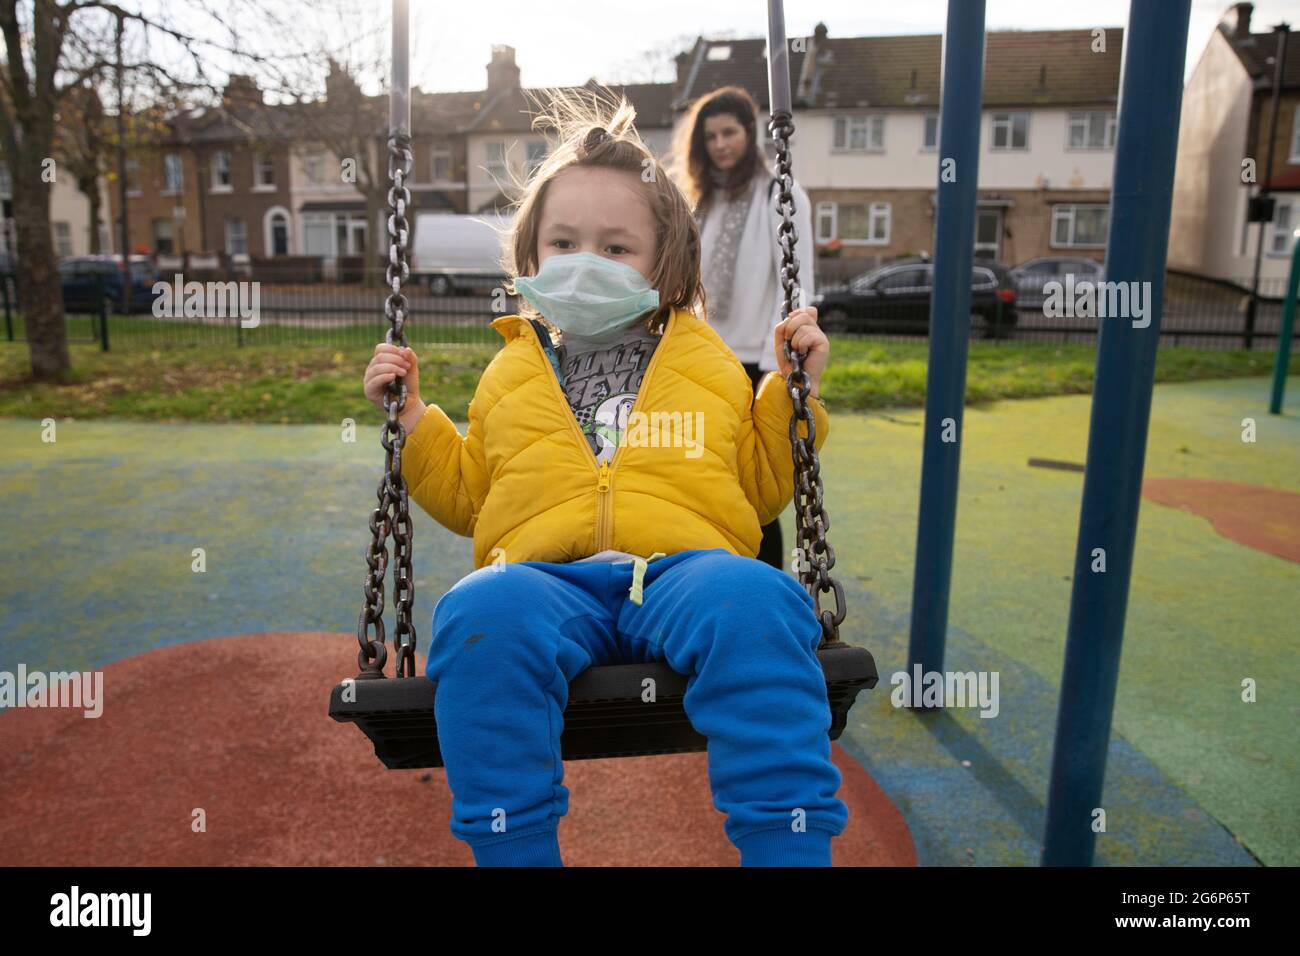 A child in a mask being pushed on a swing by his mother Stock Photo